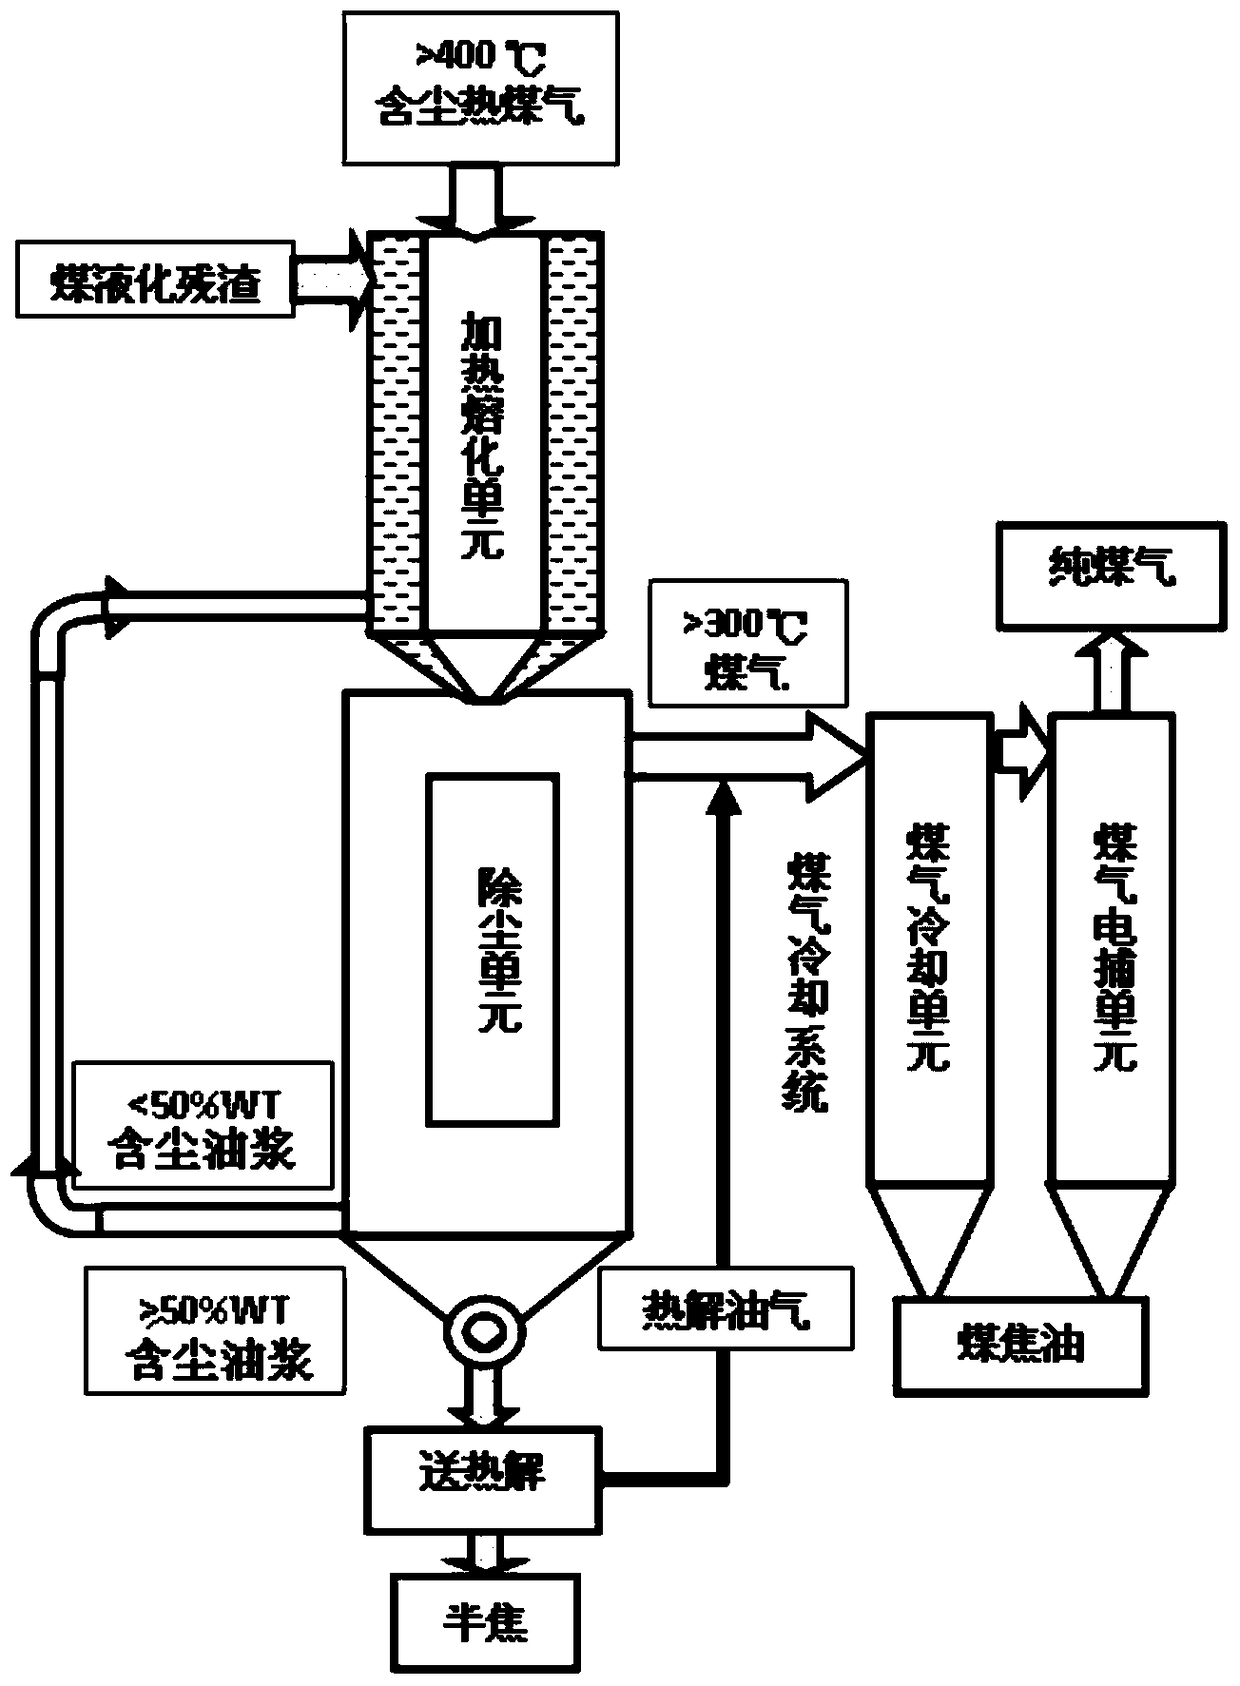 A dust removal method for pulverized coal pyrolysis high temperature gas